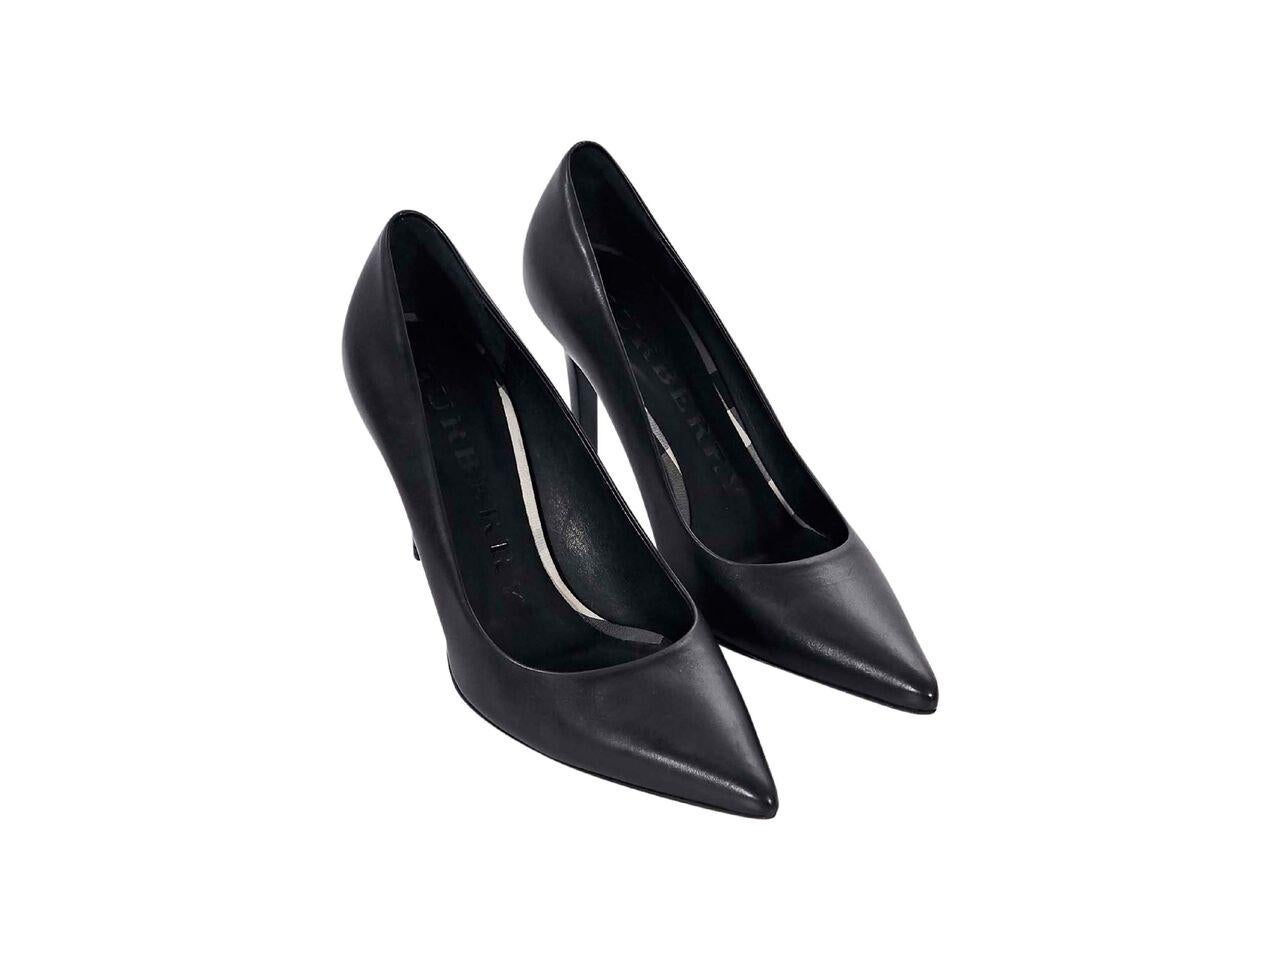 Product details:  Black leather pumps by Burberry.  Point toe.  Wooden stiletto heel.  Slip-on style.  3